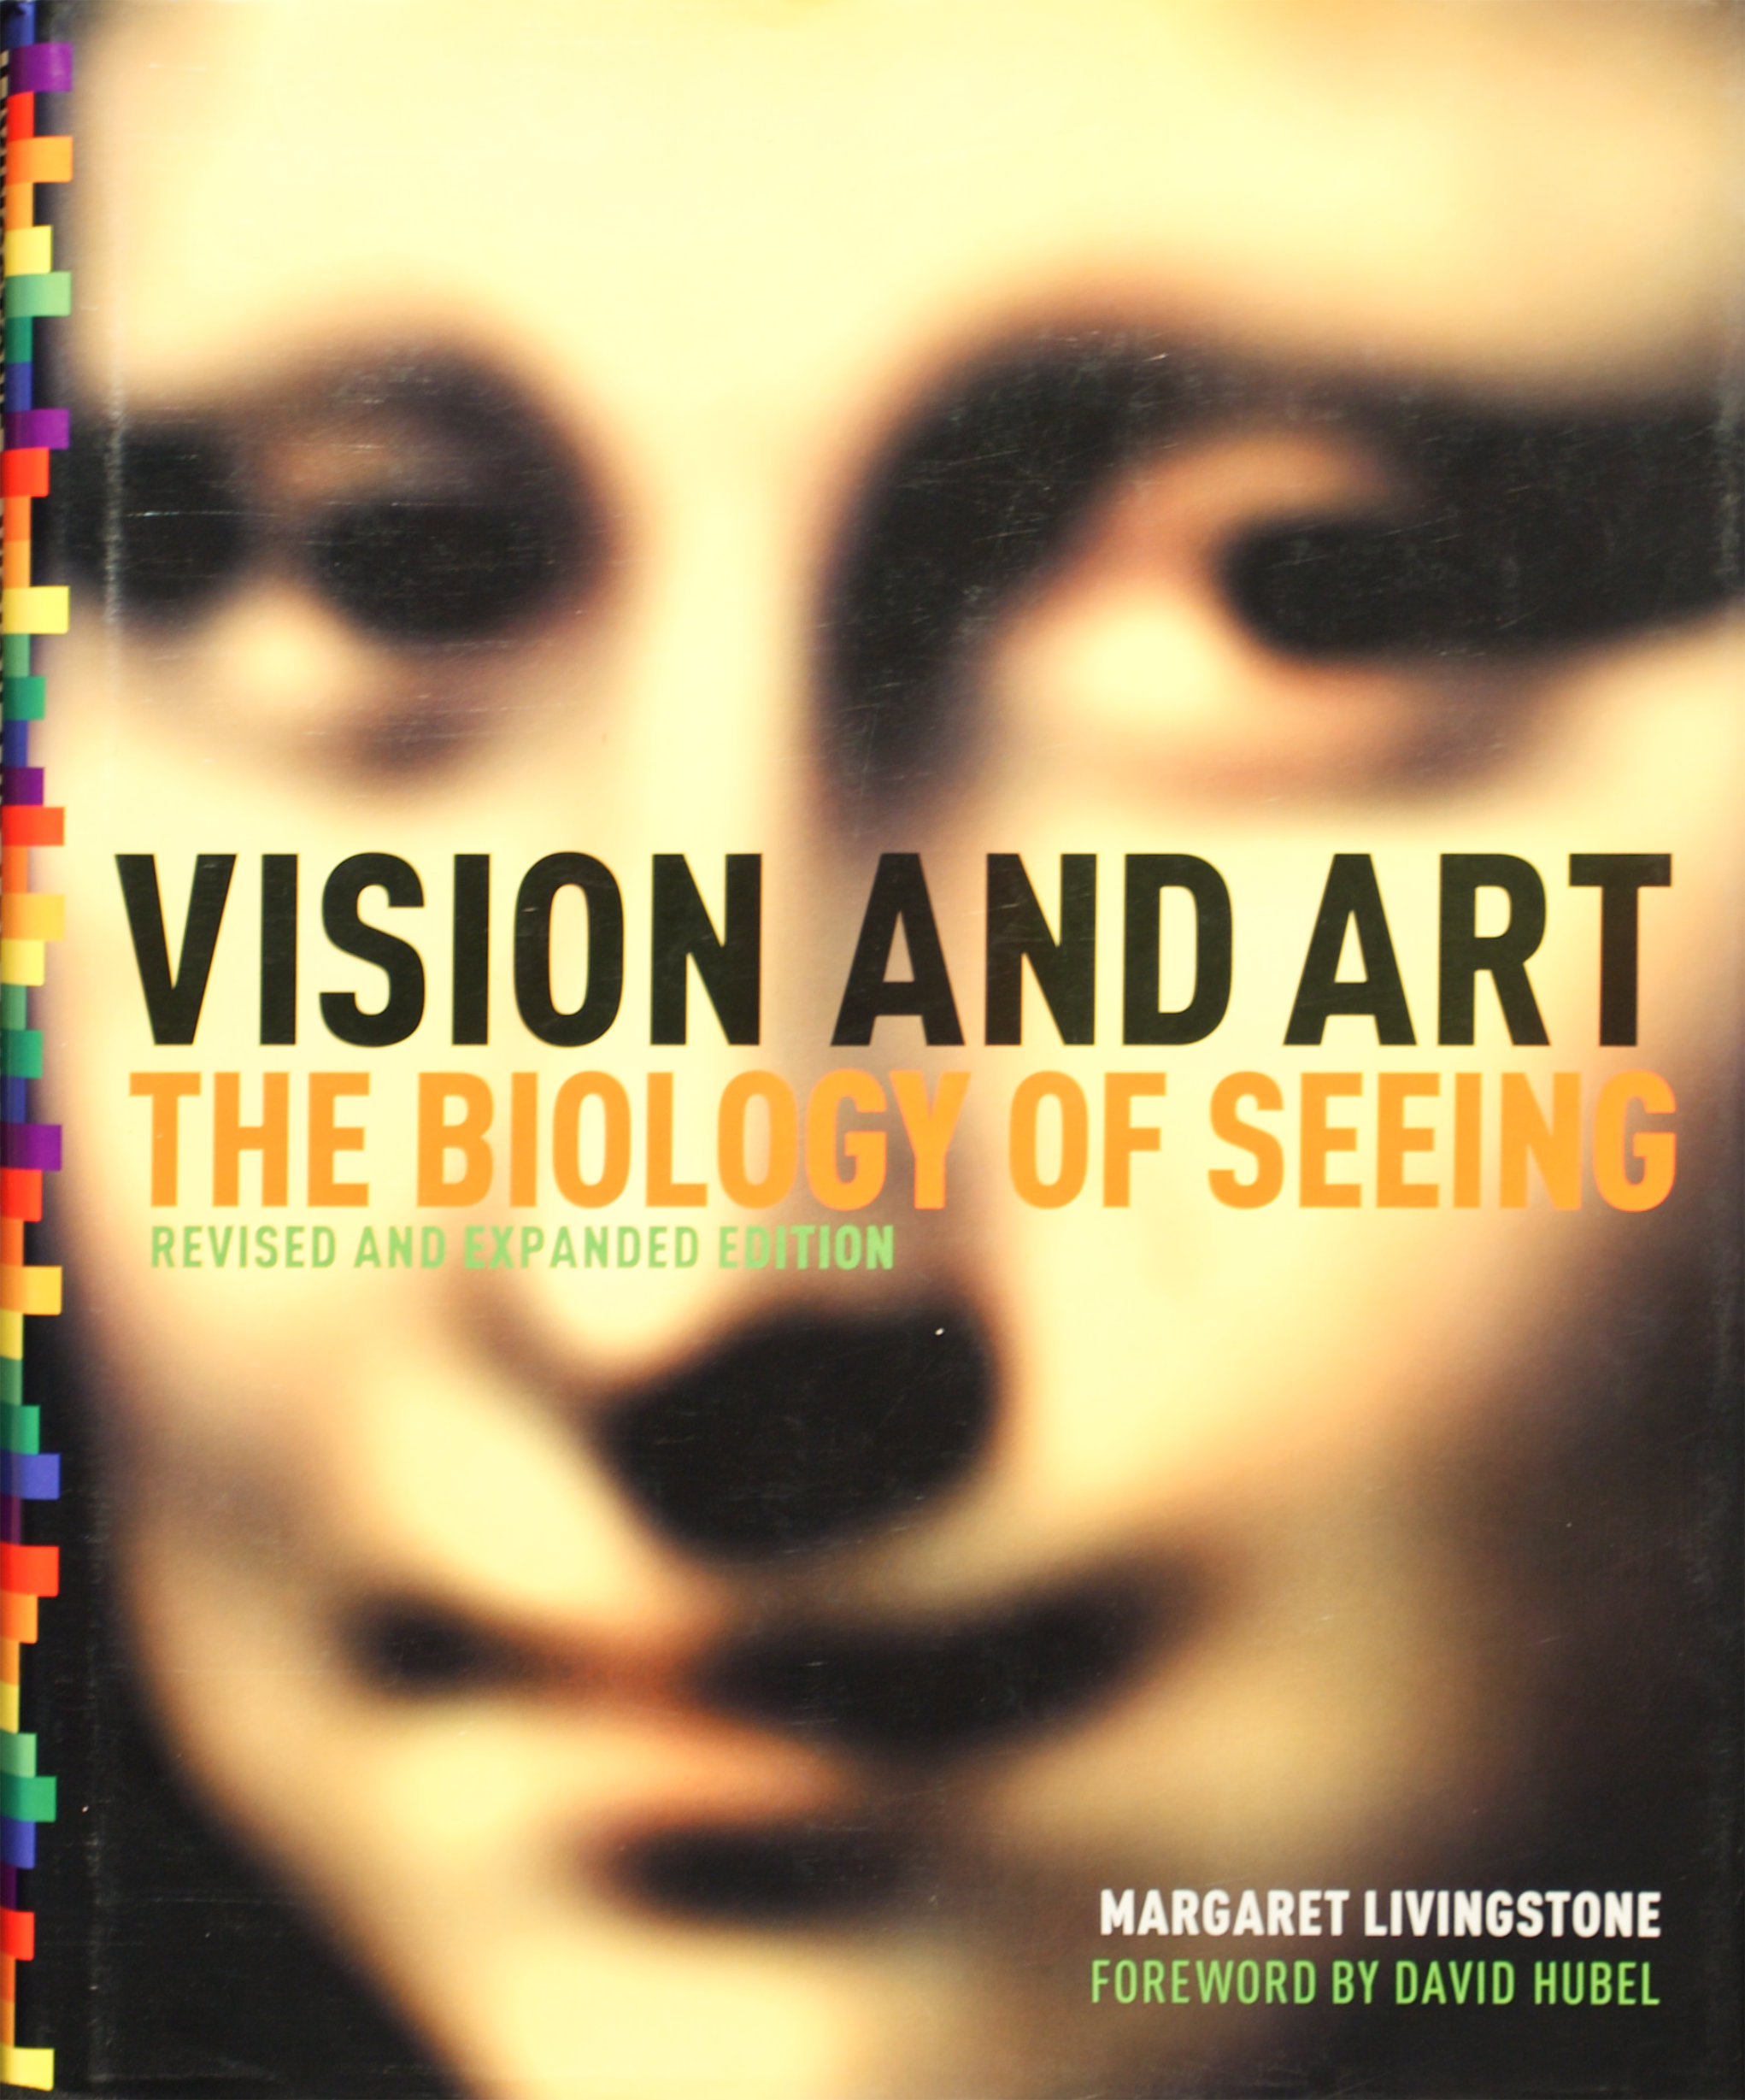 VISION AND ART(UPGRATED AND EXPANDED EDITION)